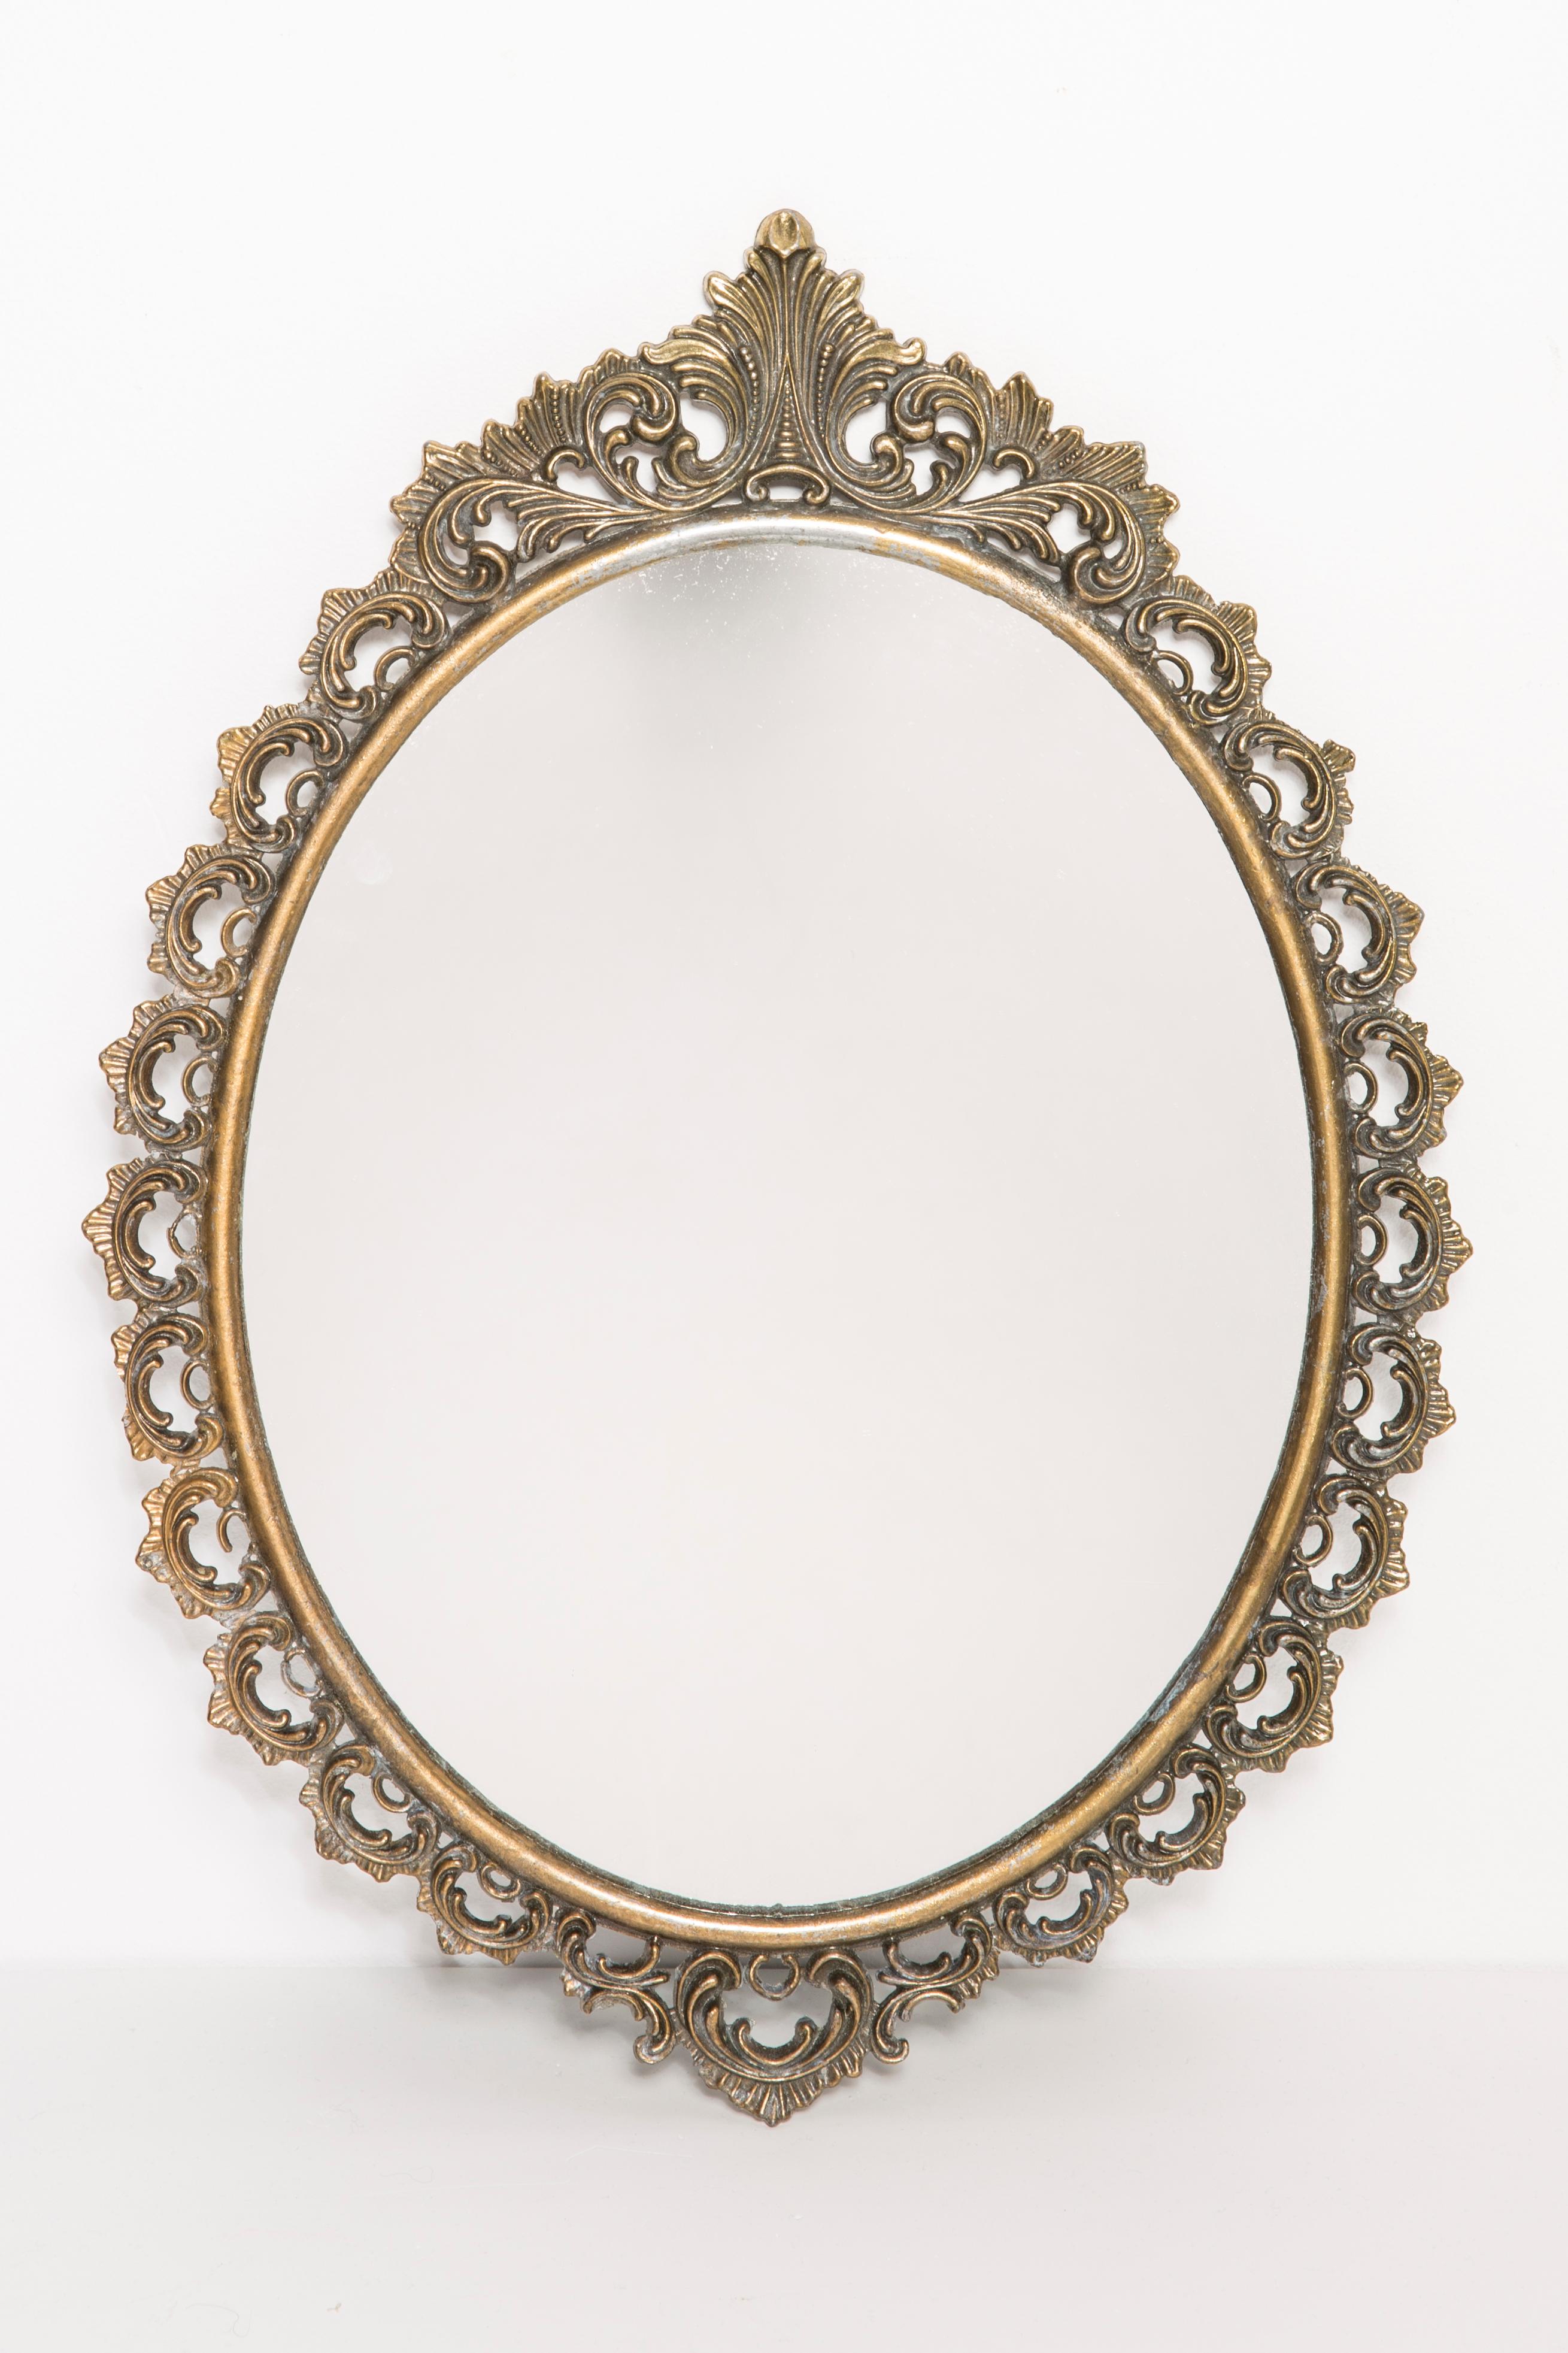 A mirror in a dark golden decorative frame from Italy. The frame is made of metal. Mirror is in very good vintage condition, no damage or cracks in the frame. Original glass. Beautiful piece for every interior! Only one unique piece.